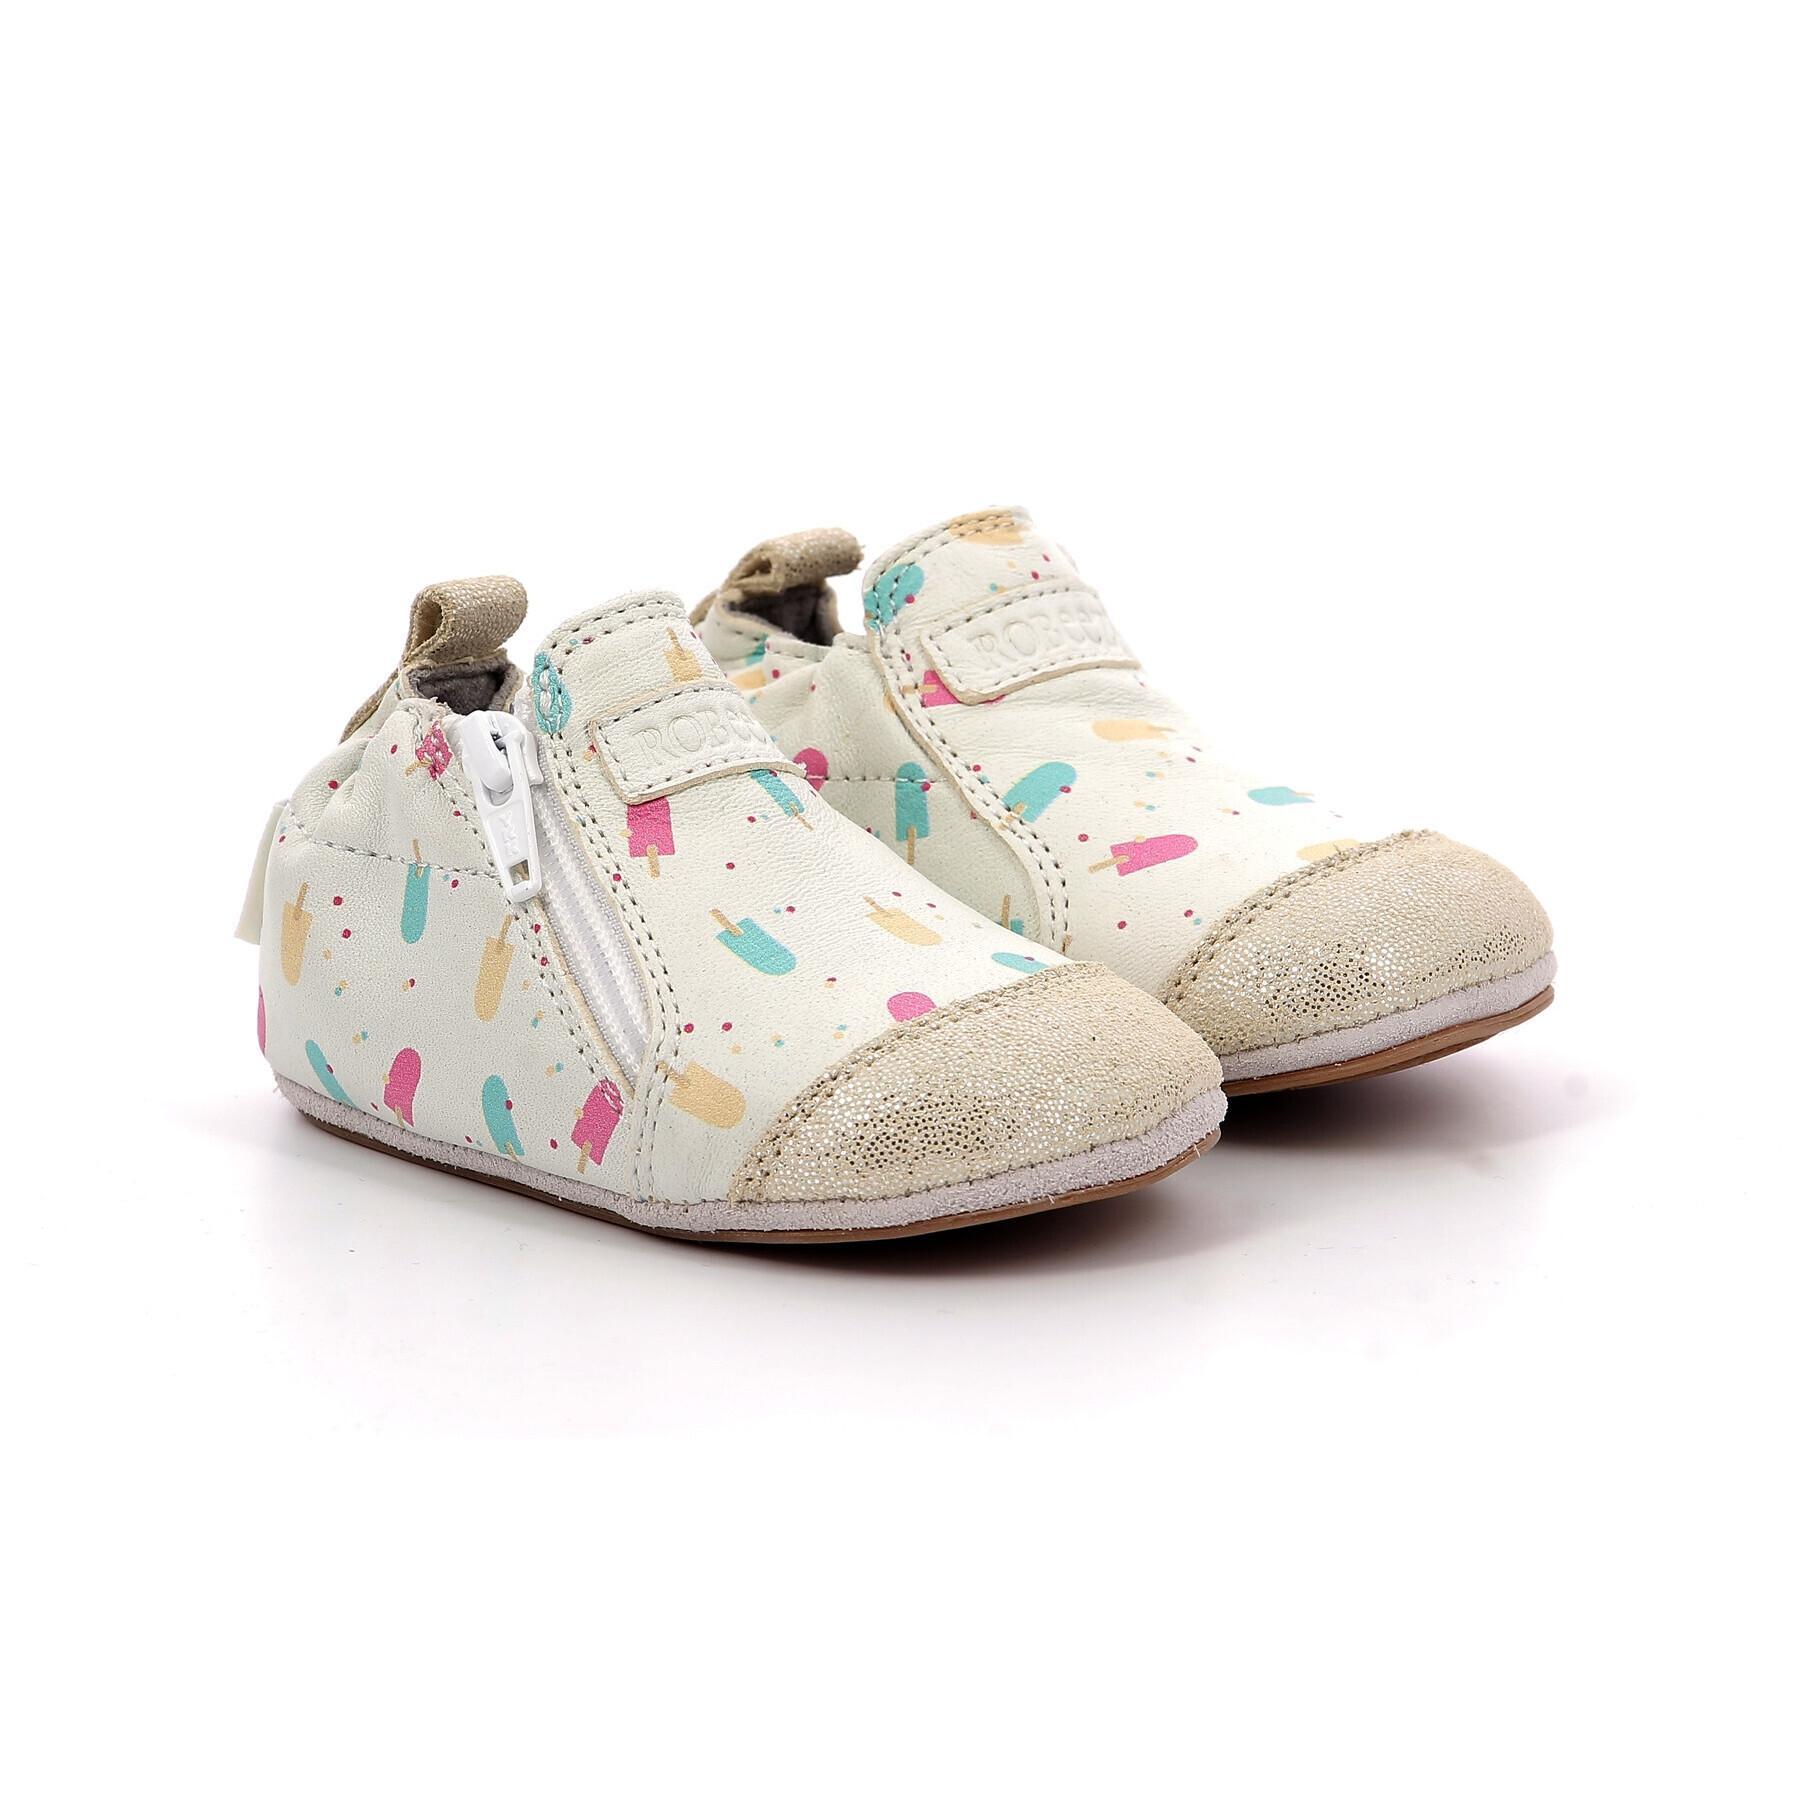 Baby girl slippers Robeez Confetti Ice